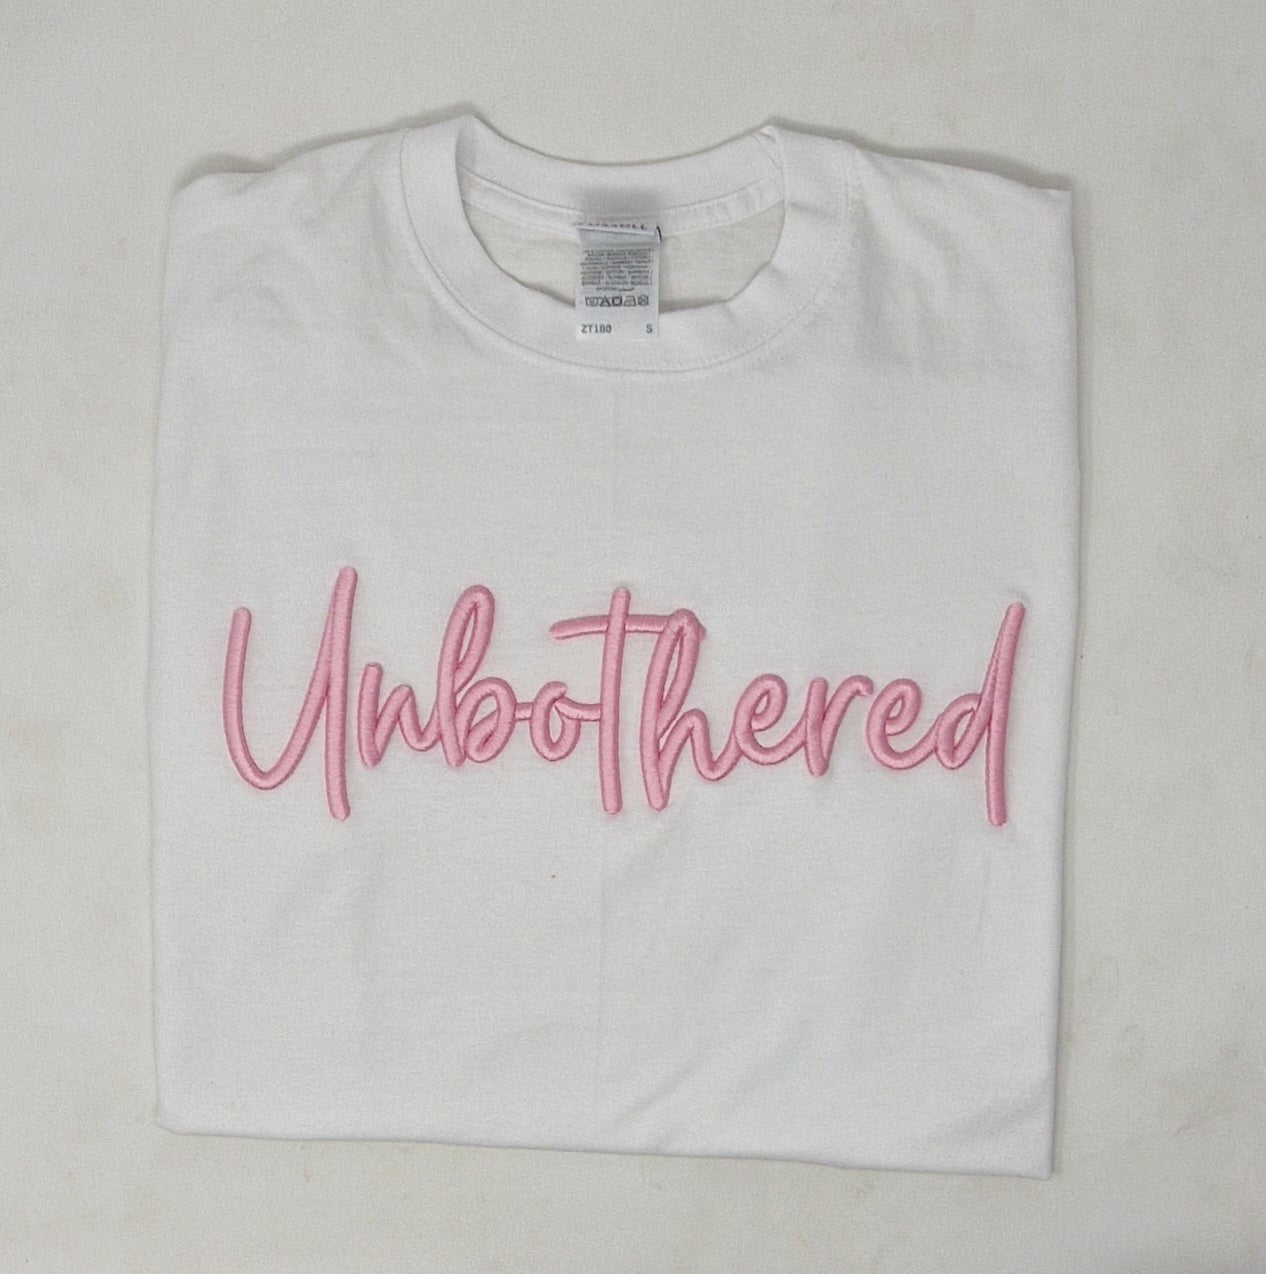 Unbothered Tshirt